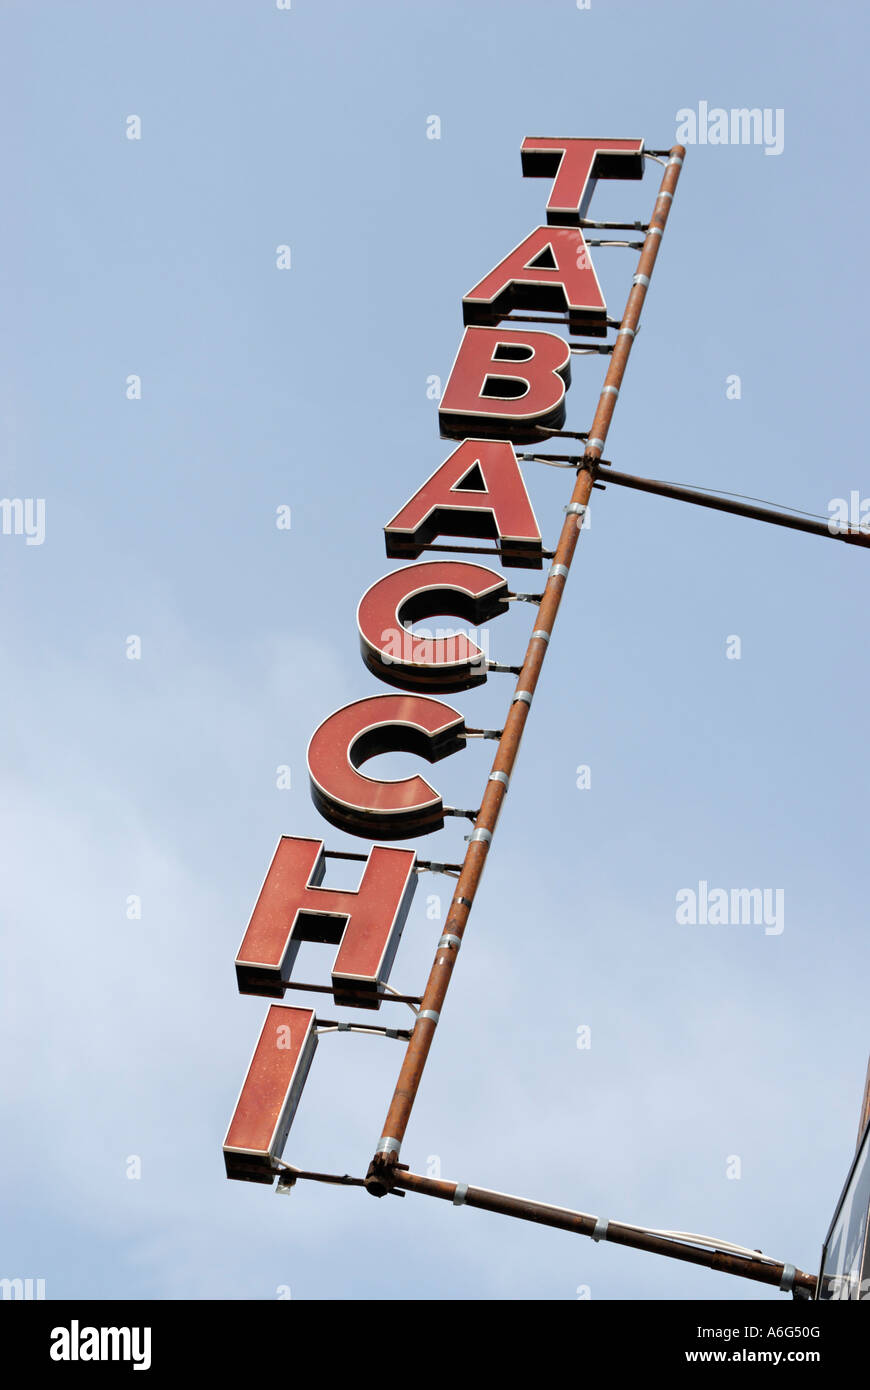 Shop Tabacchi sign in Italy Stock Photo